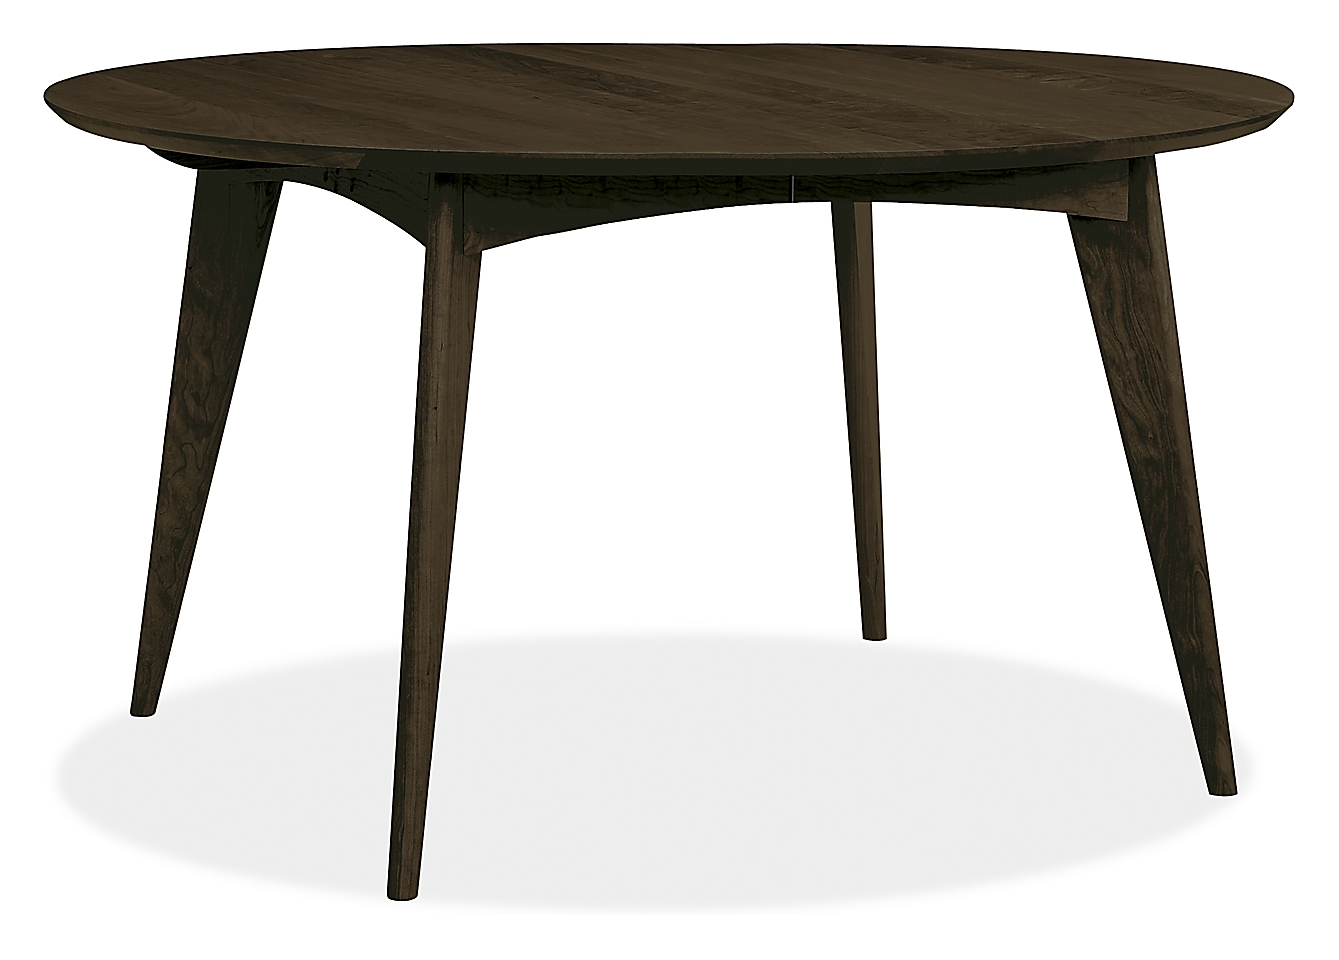 Ventura Round Extension Table - 54" - Maple with charcoal stain - Image 0